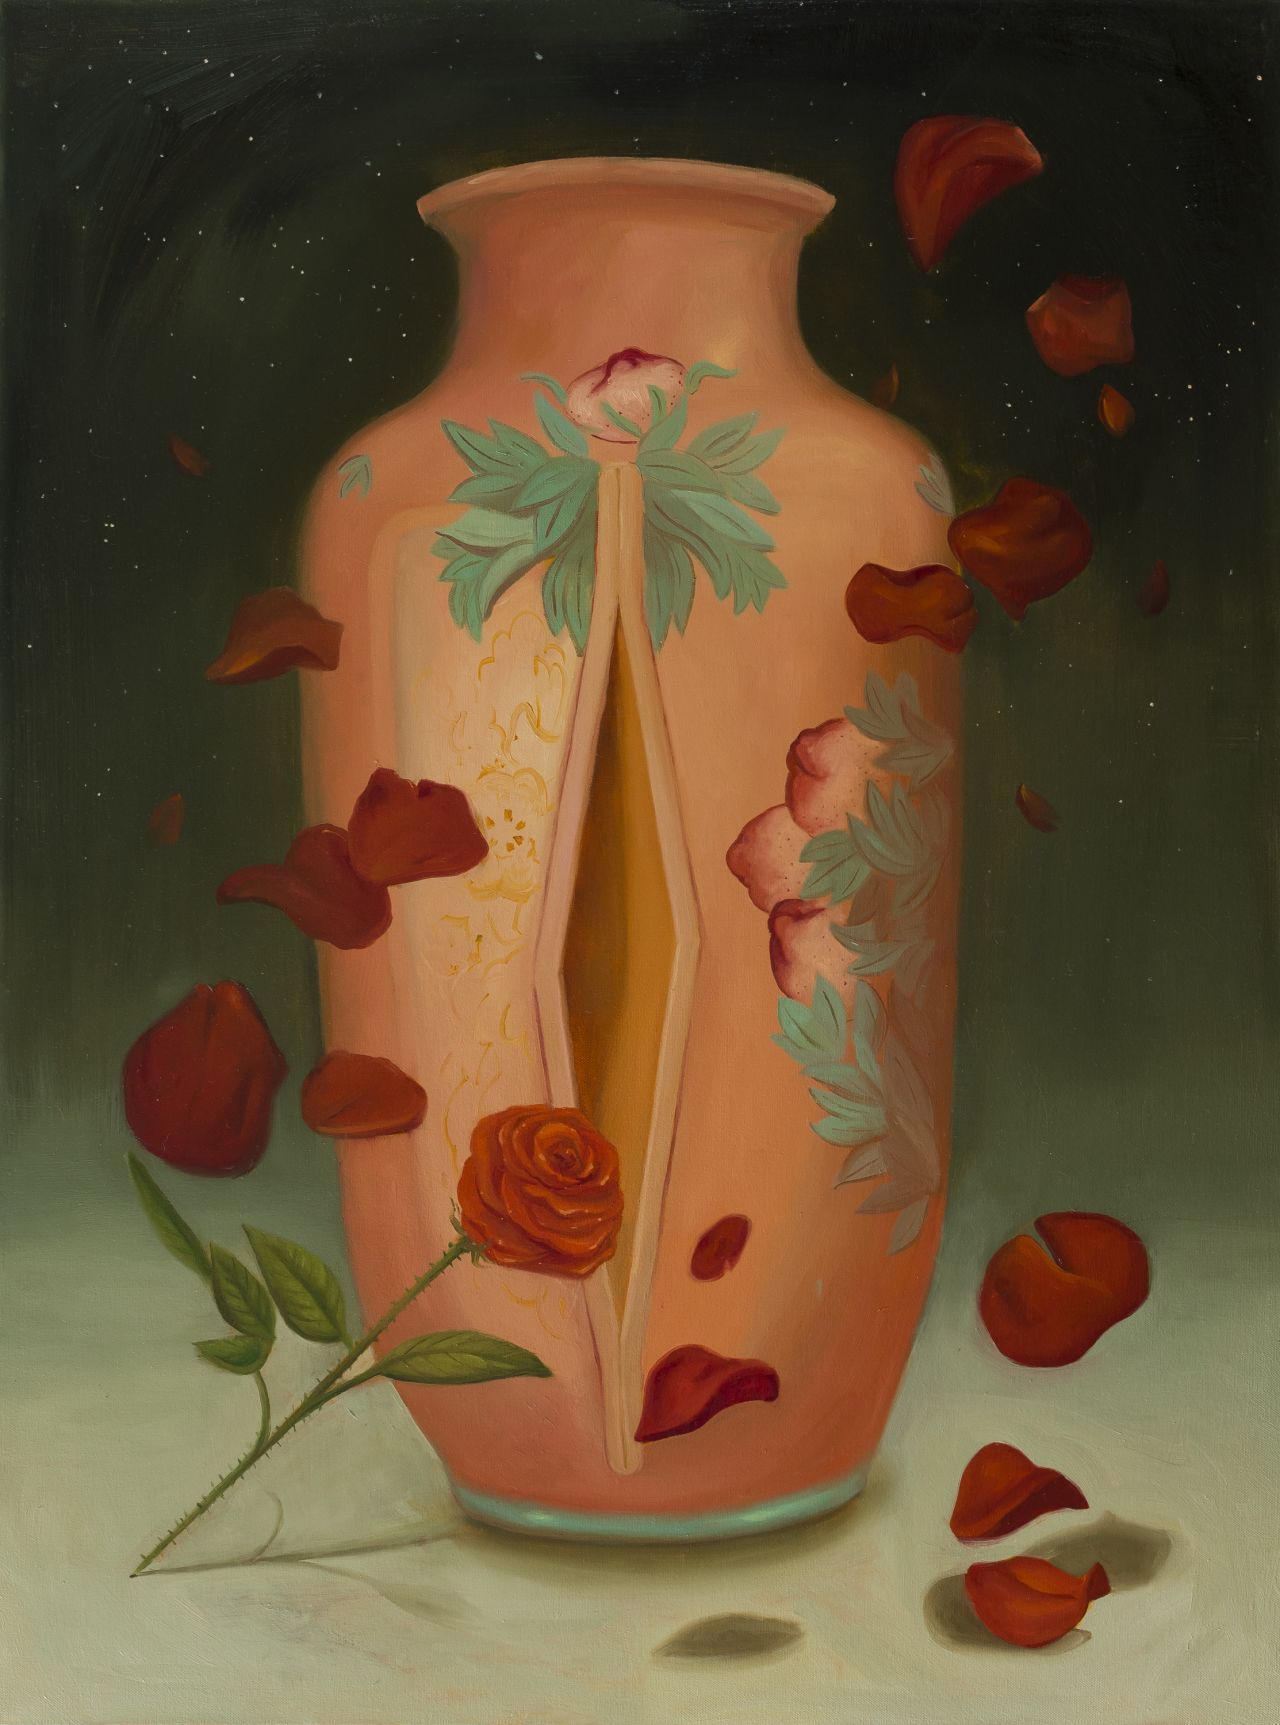 "An Alluring Vase" (2019) by Dominique Fung. 